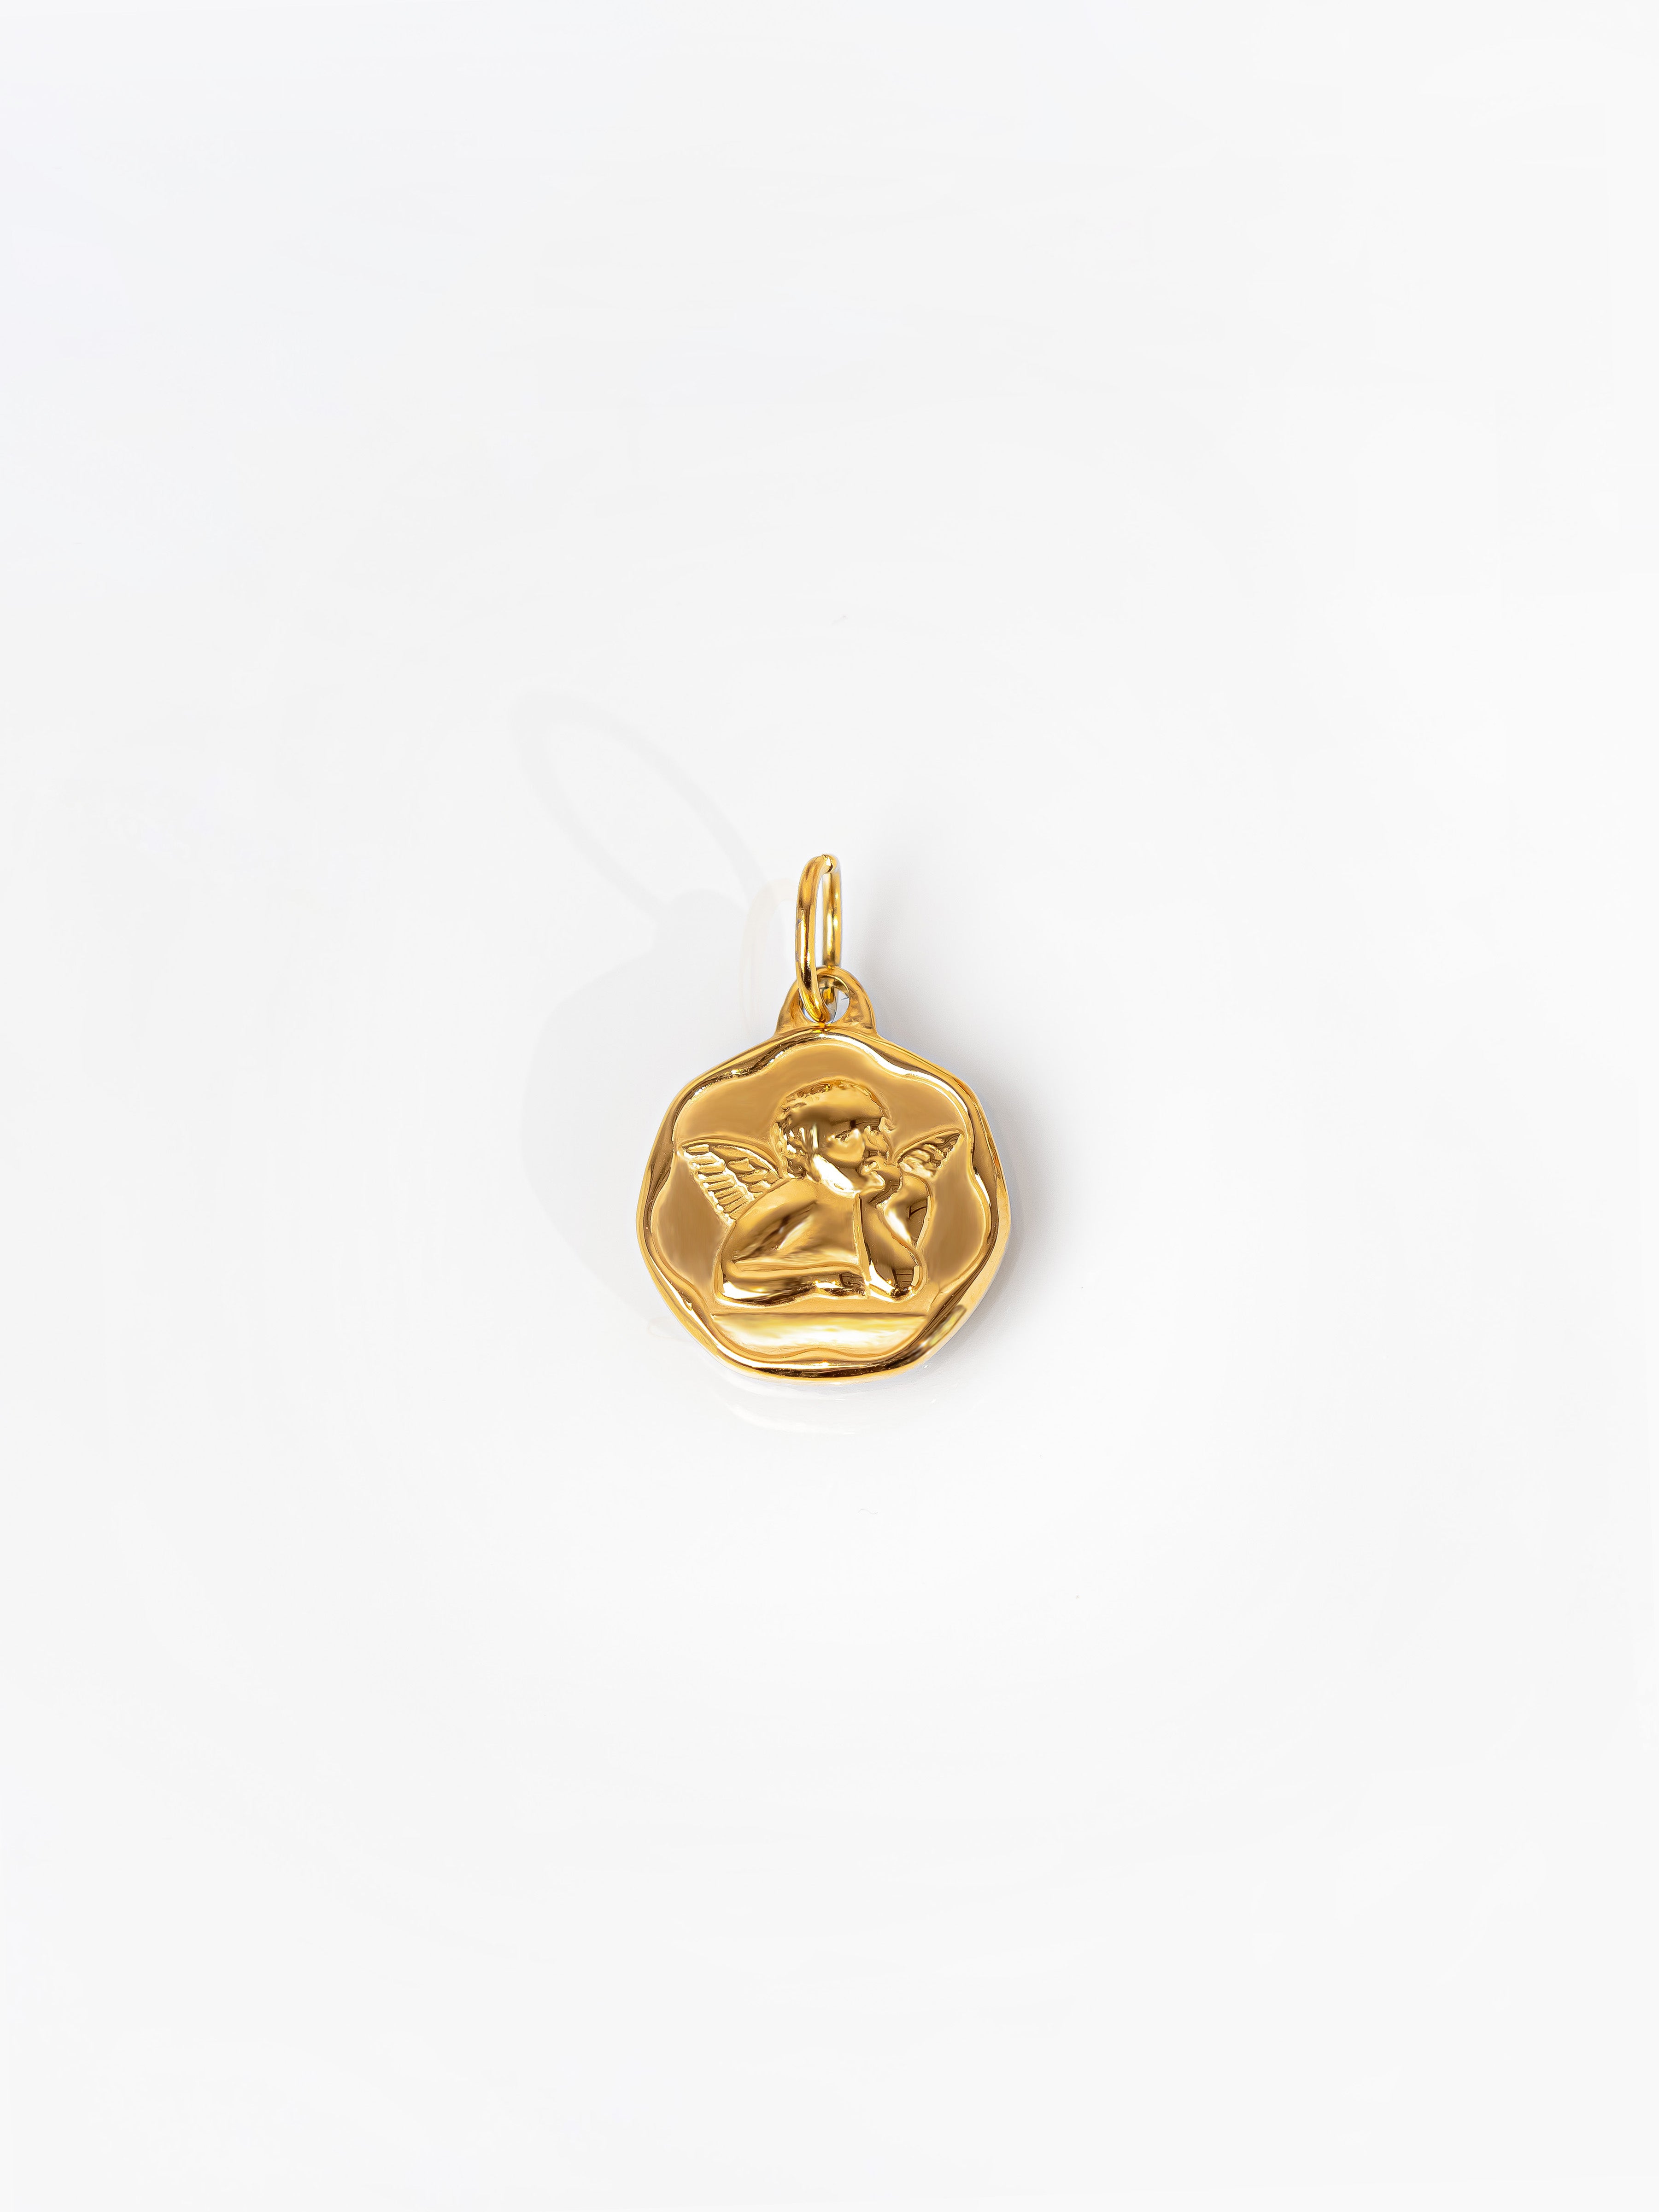 Gold Angel Coin Pendant / Charm